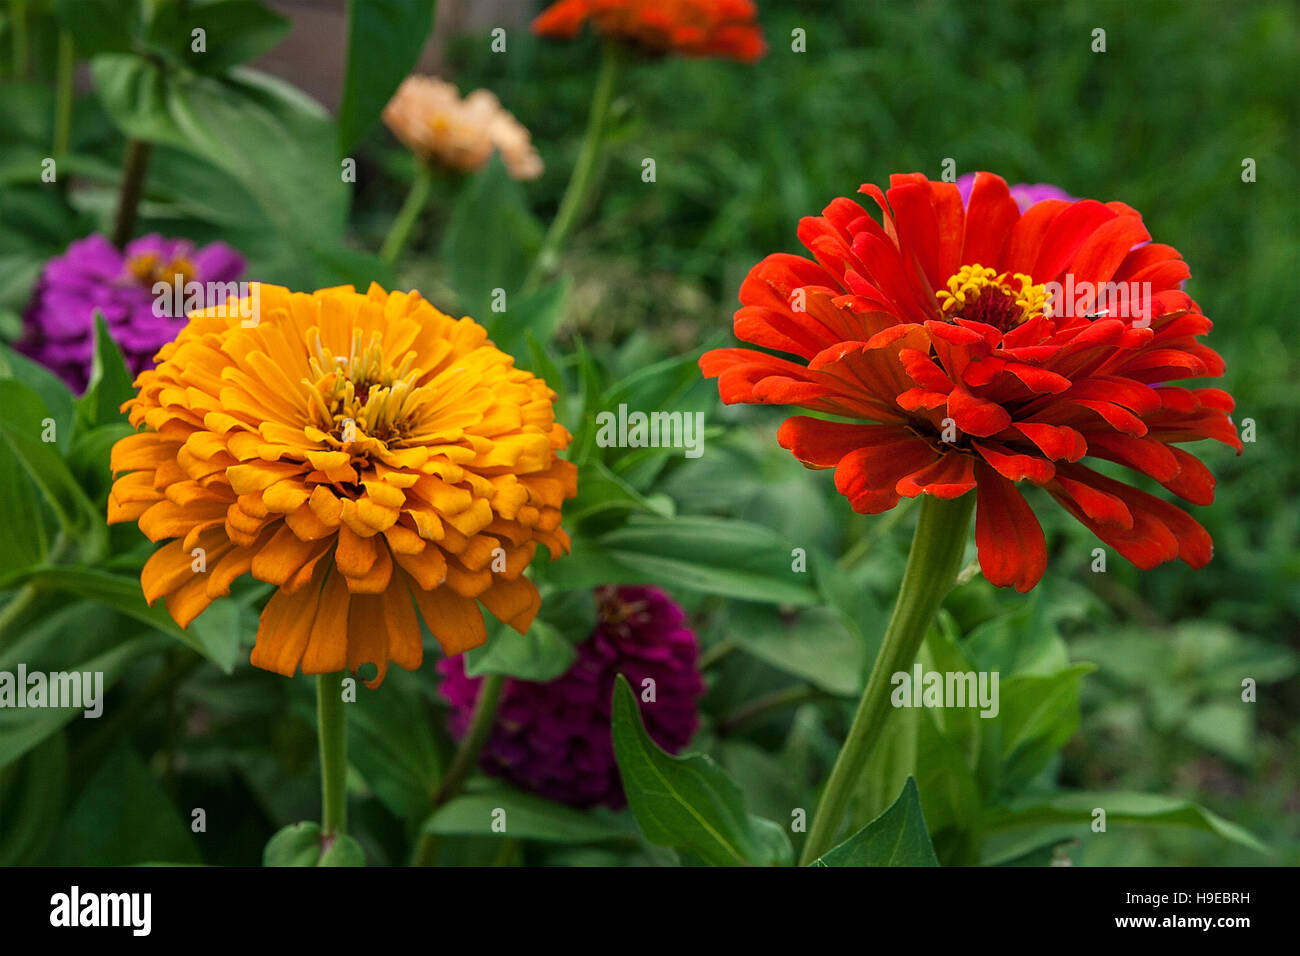 Beautiful Zinnia Flowers On Green Leaf Background Close Up View Of Stock Photo Alamy